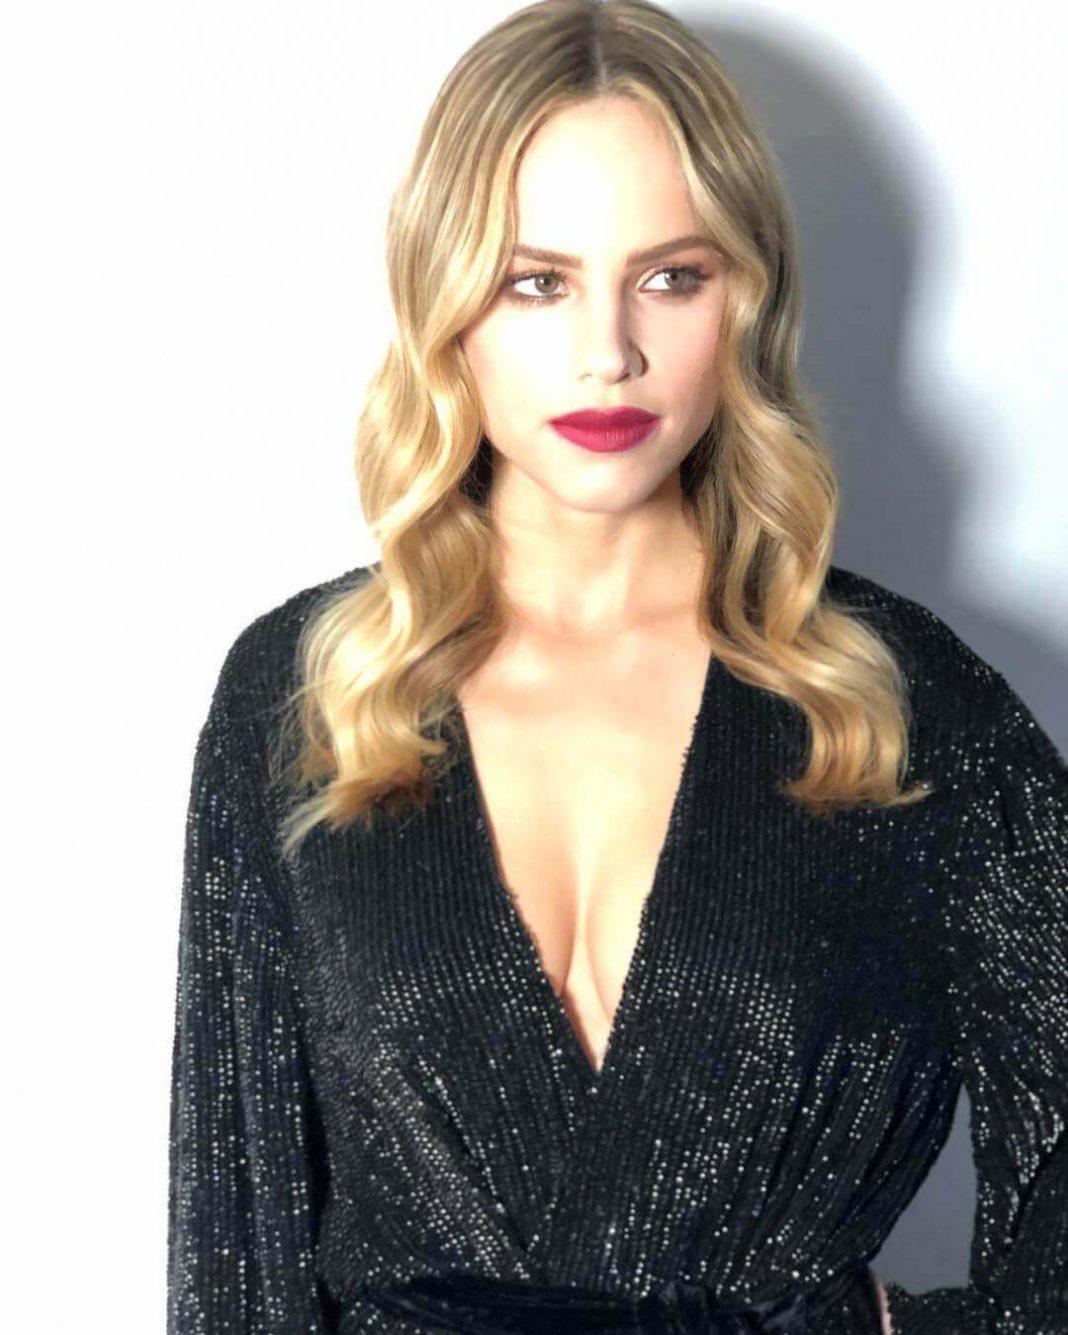 49 Halston Sage Nude Pictures Which Prove Beauty Beyond Recognition 34